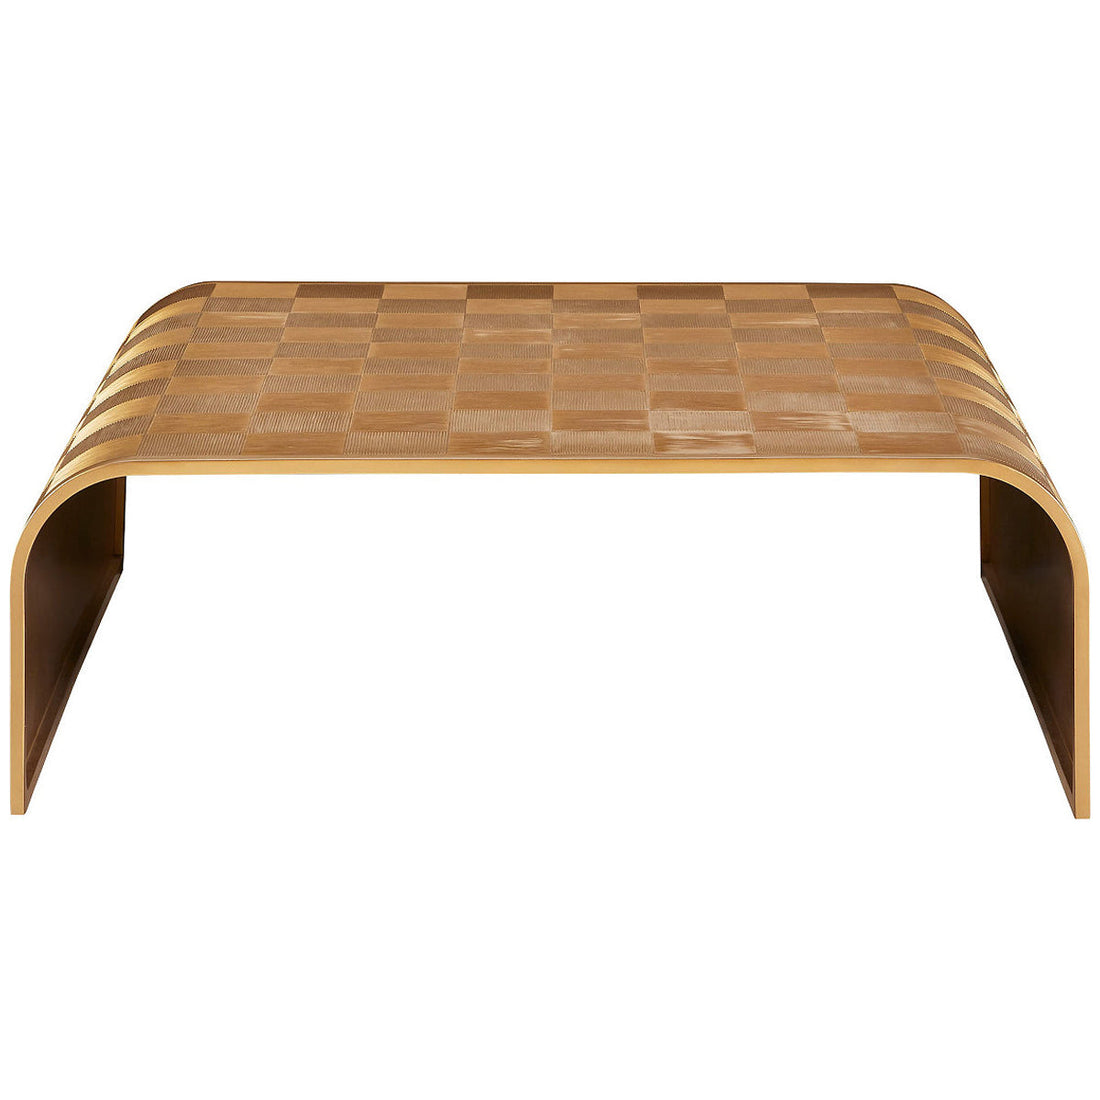 Baker Furniture Weave Square Cocktail Table MCA2153